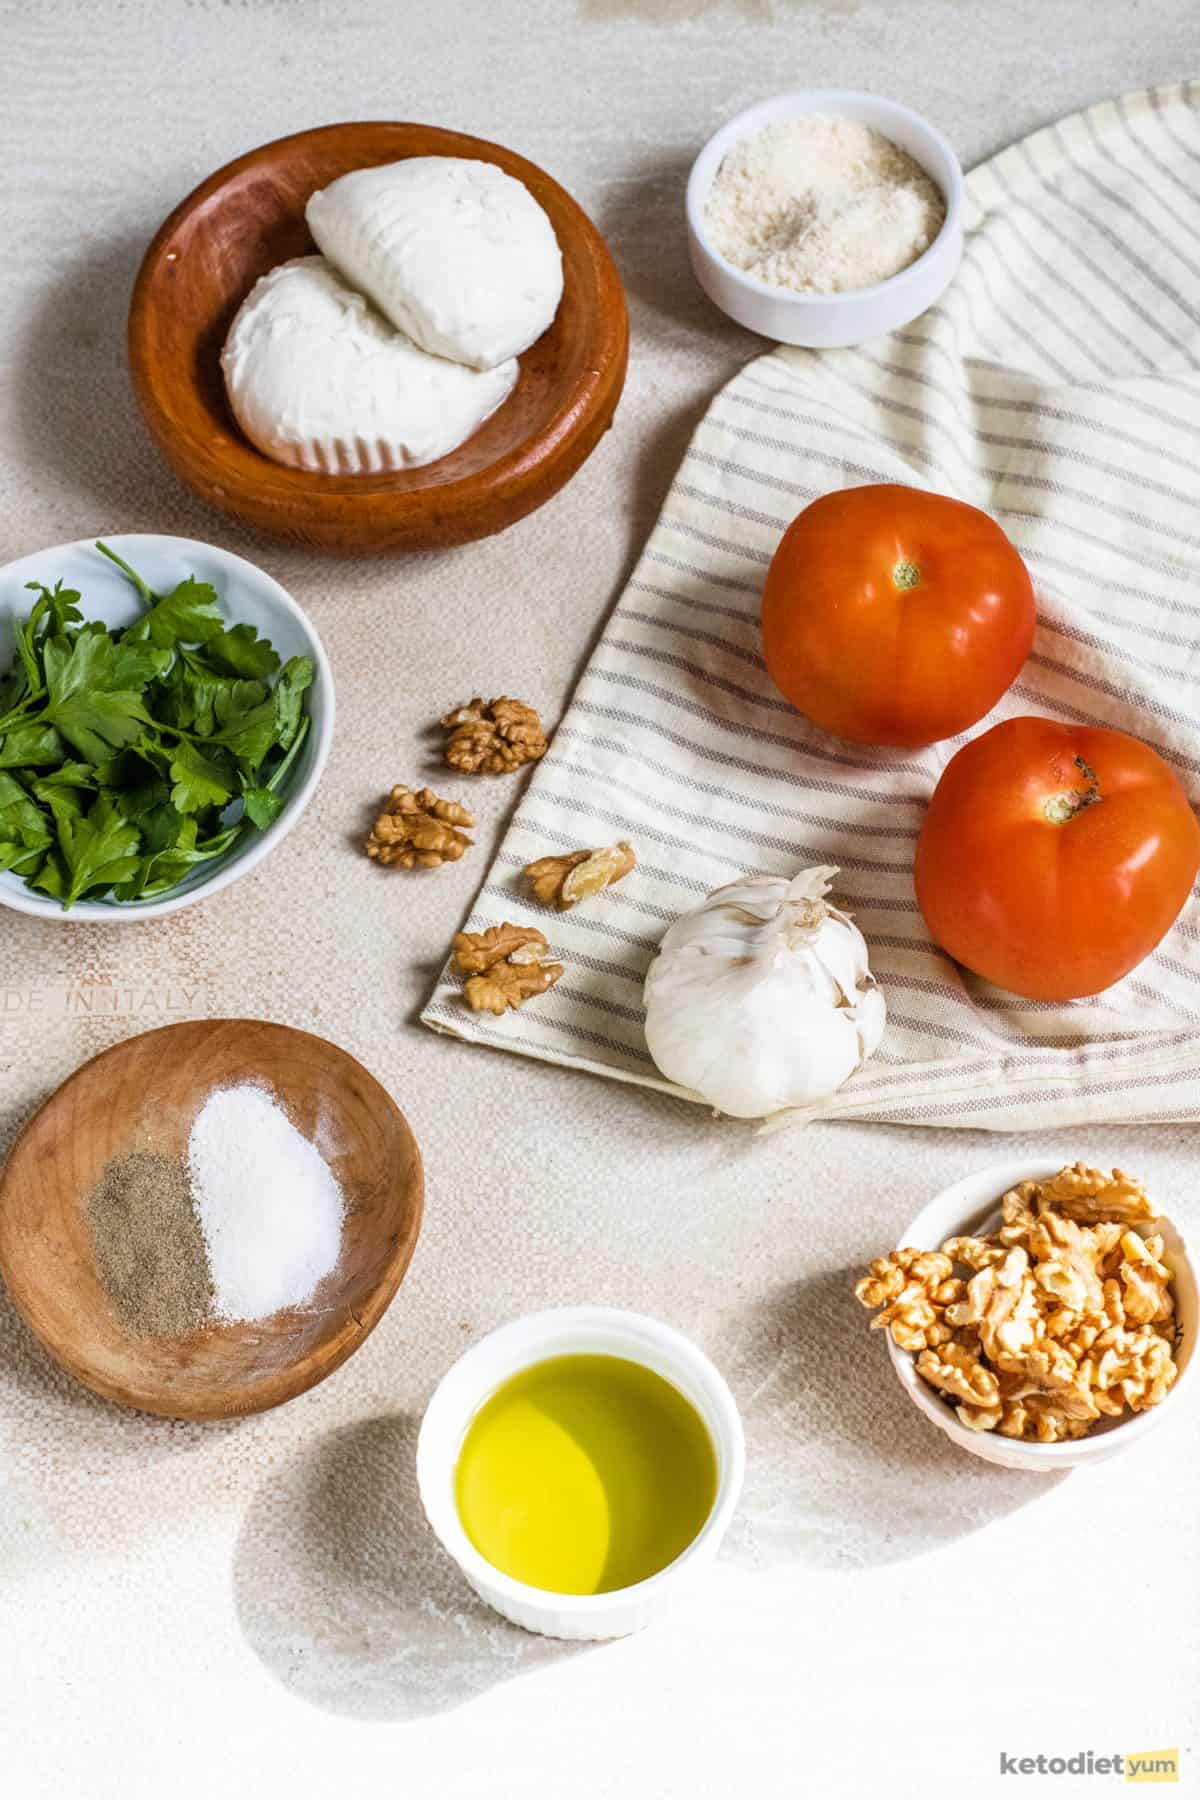 Simple and fresh ingredients on a table to make a keto caprese salad